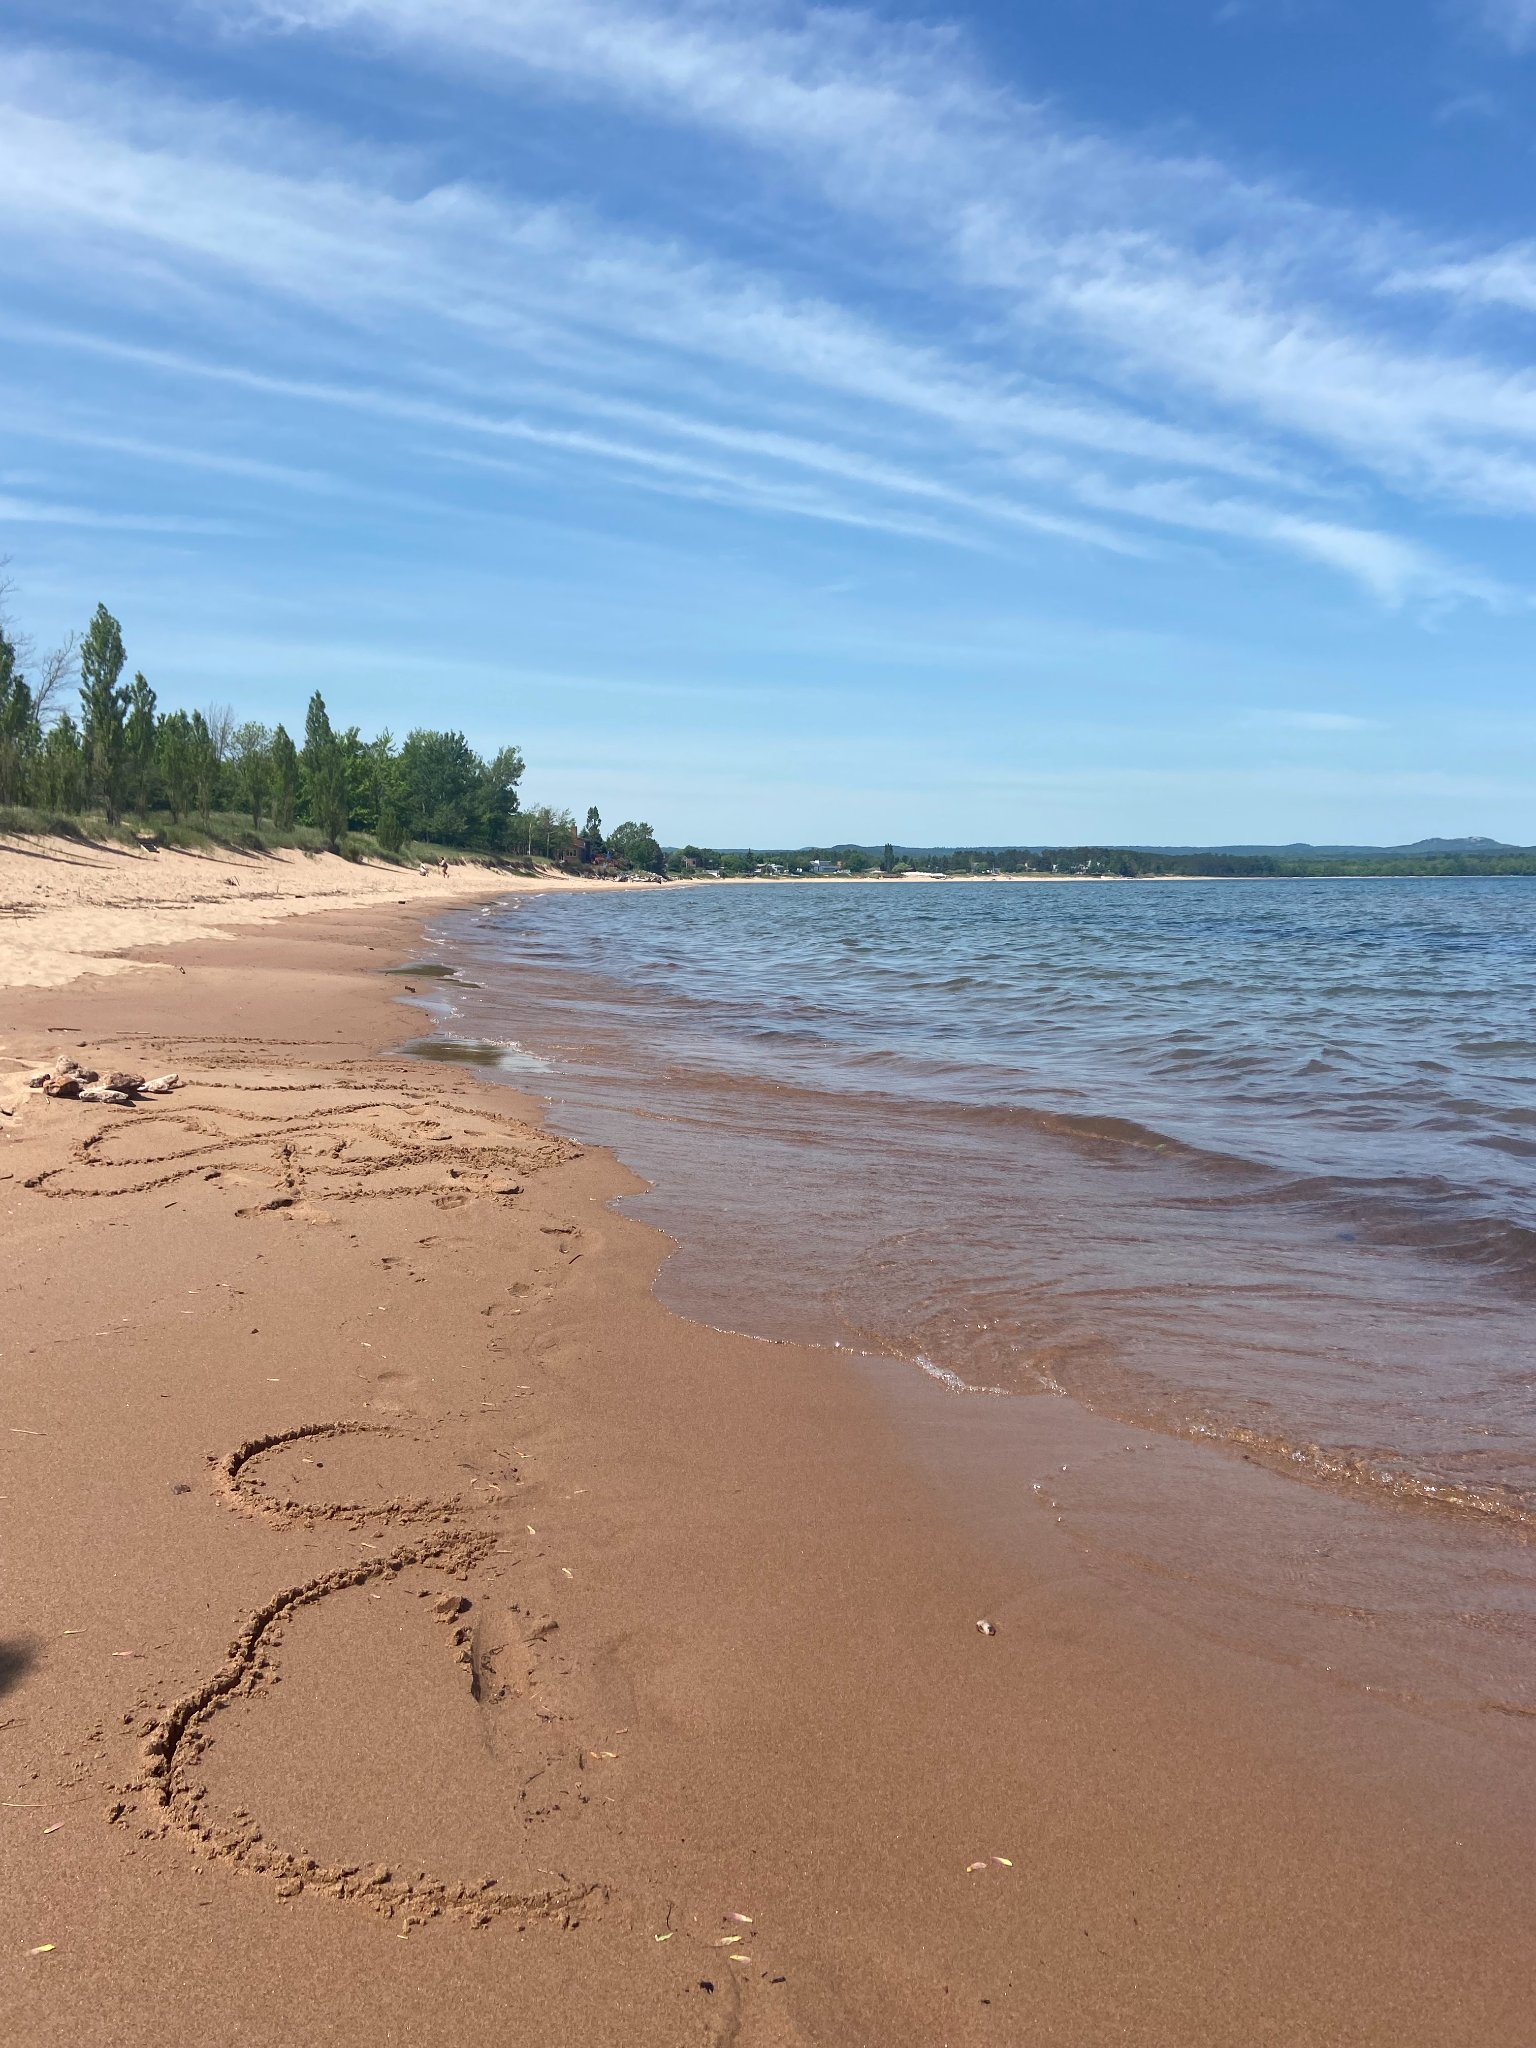 Climate-Monitoring and Maritime-Safety Buoys Deployed in Lake Superior